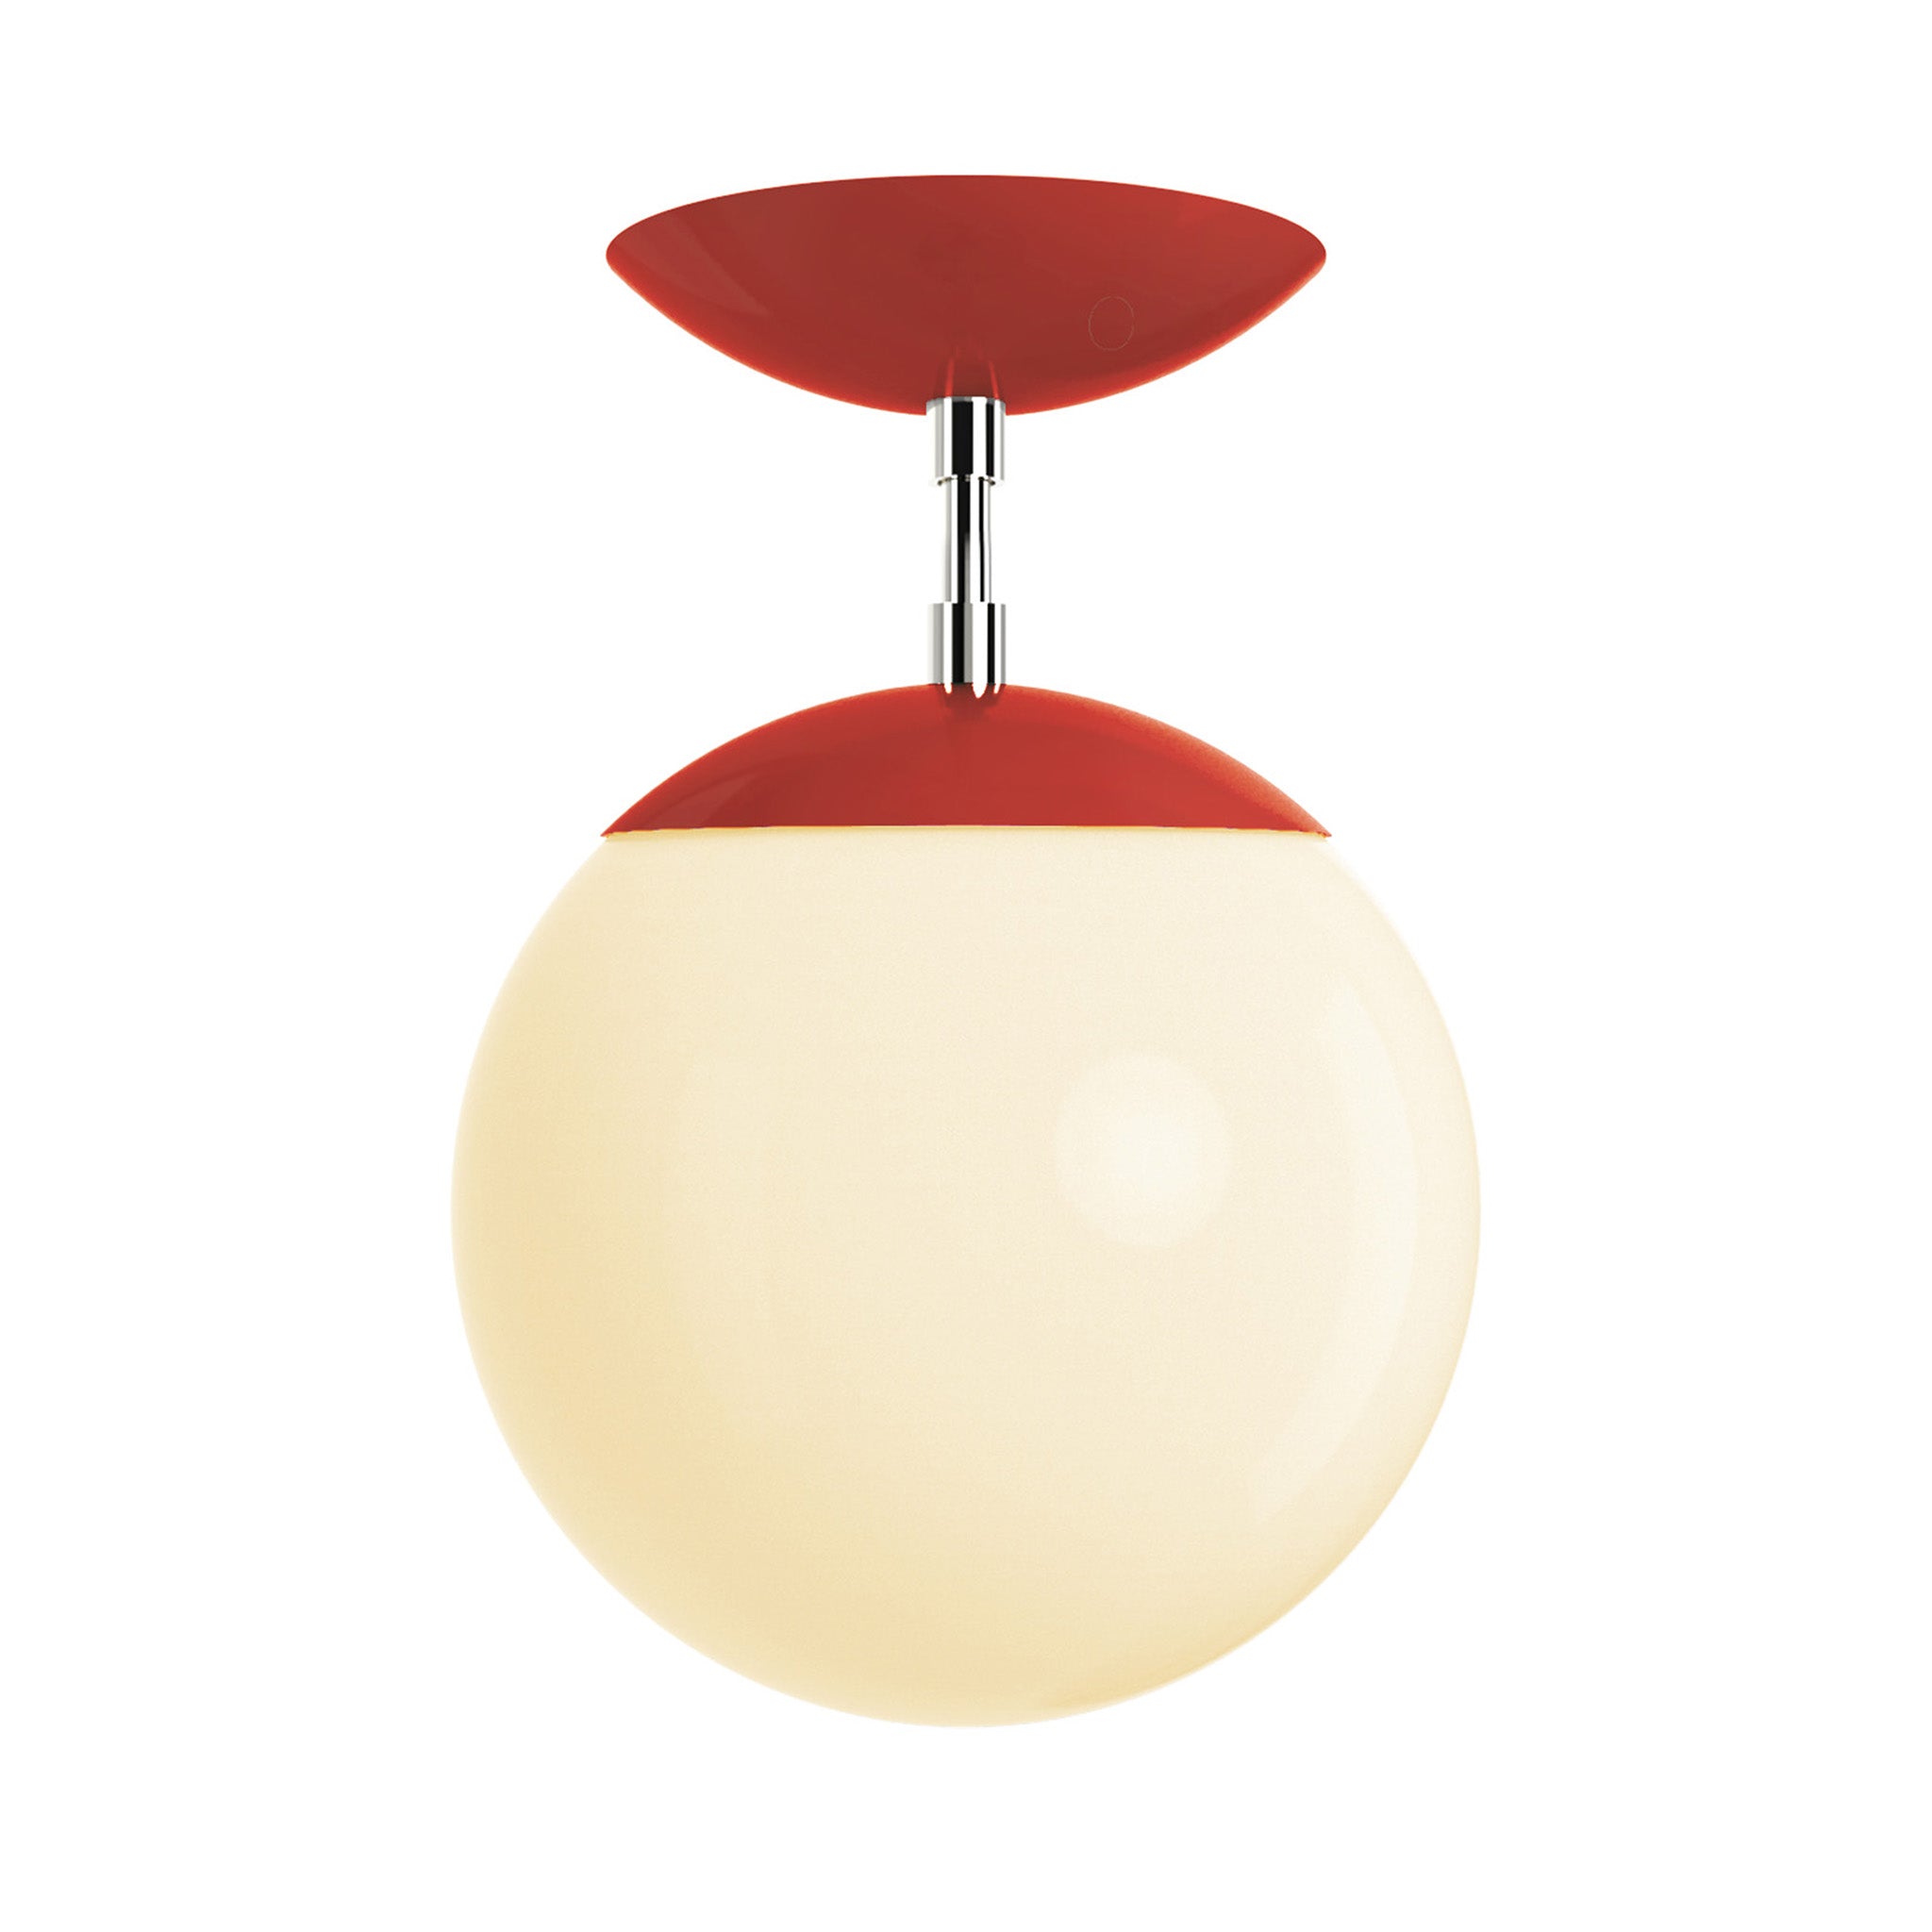 Polished nickel and riding hood red cap globe flush mount 8" dutton brown lighting